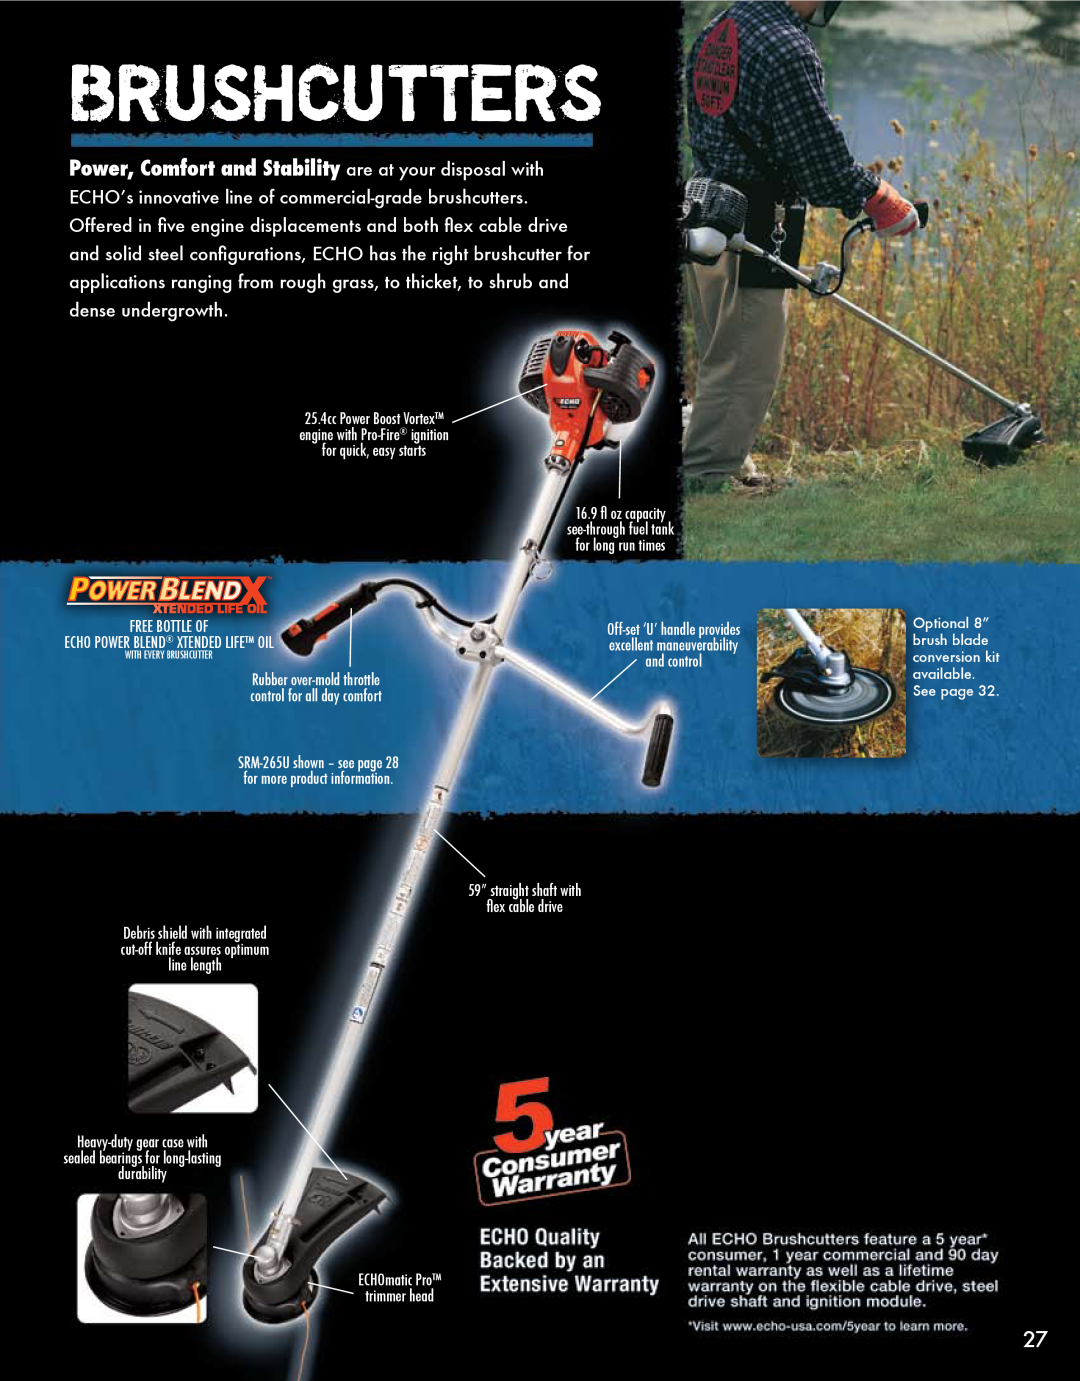 Echo HV-110XG manual Brushcutters, 59” straight shaft with flex cable drive, ECHOmatic Pro trimmer head 